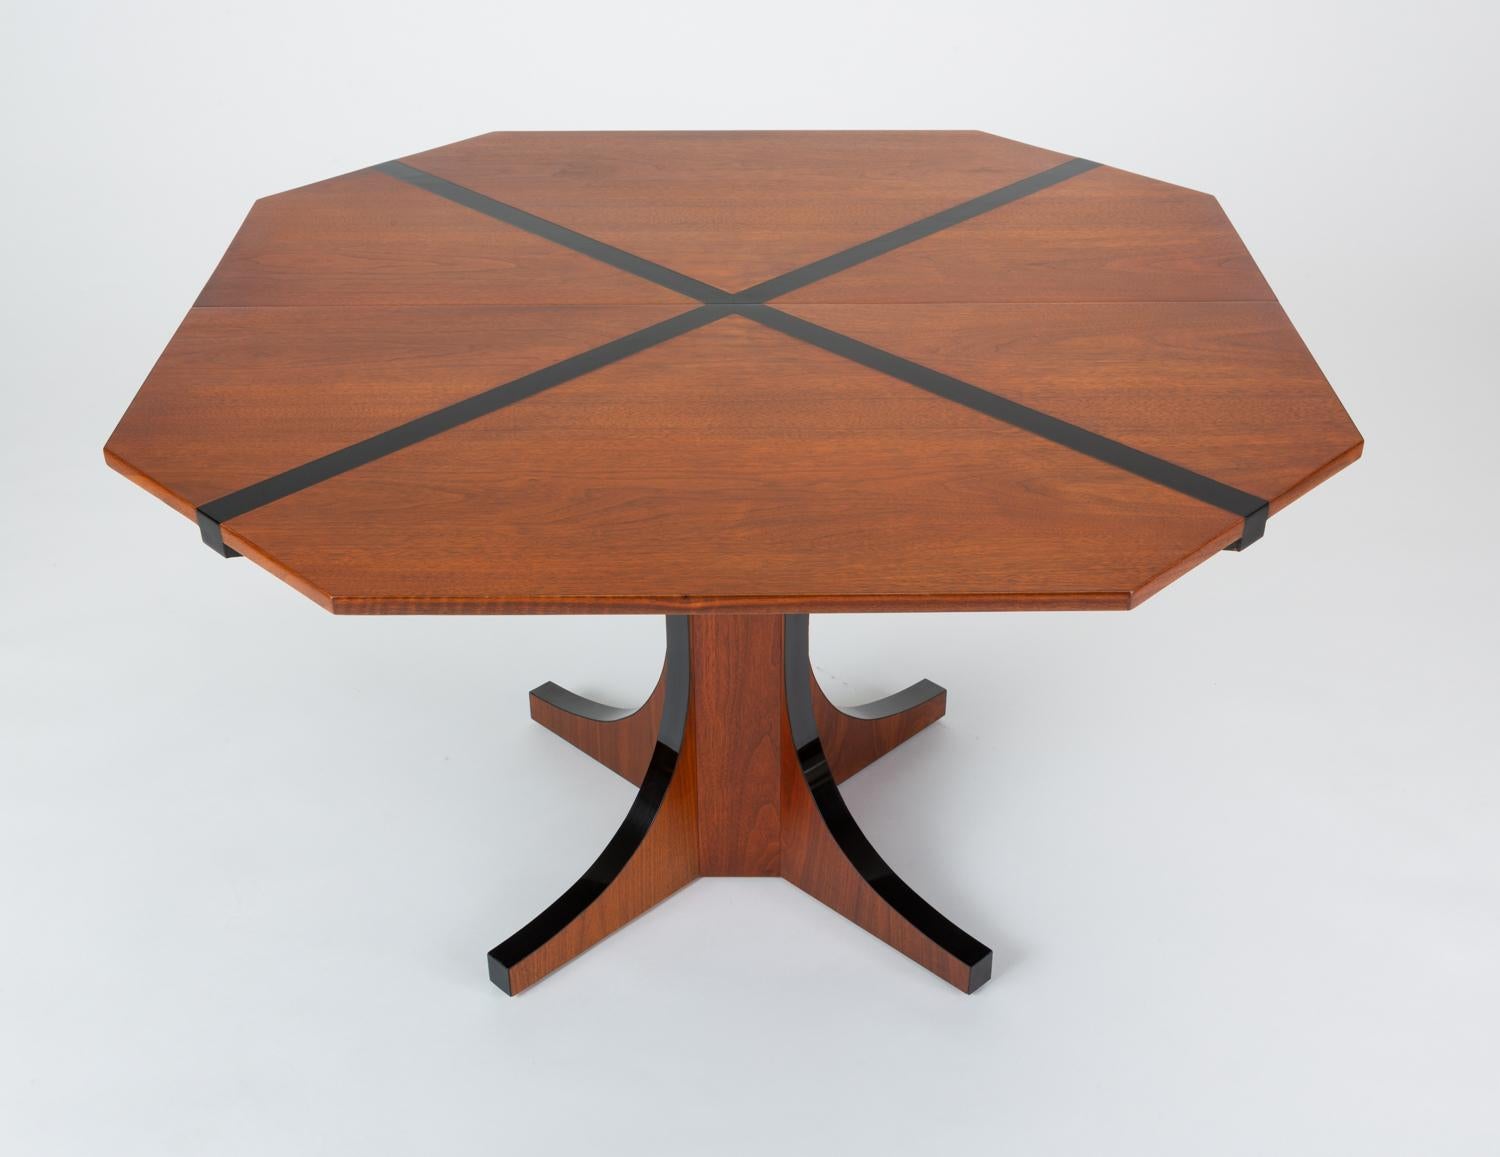 A dining table designed by John Kapel for Glenn of California with a truncated square top inlaid with a black laminate detail in the shape of an 